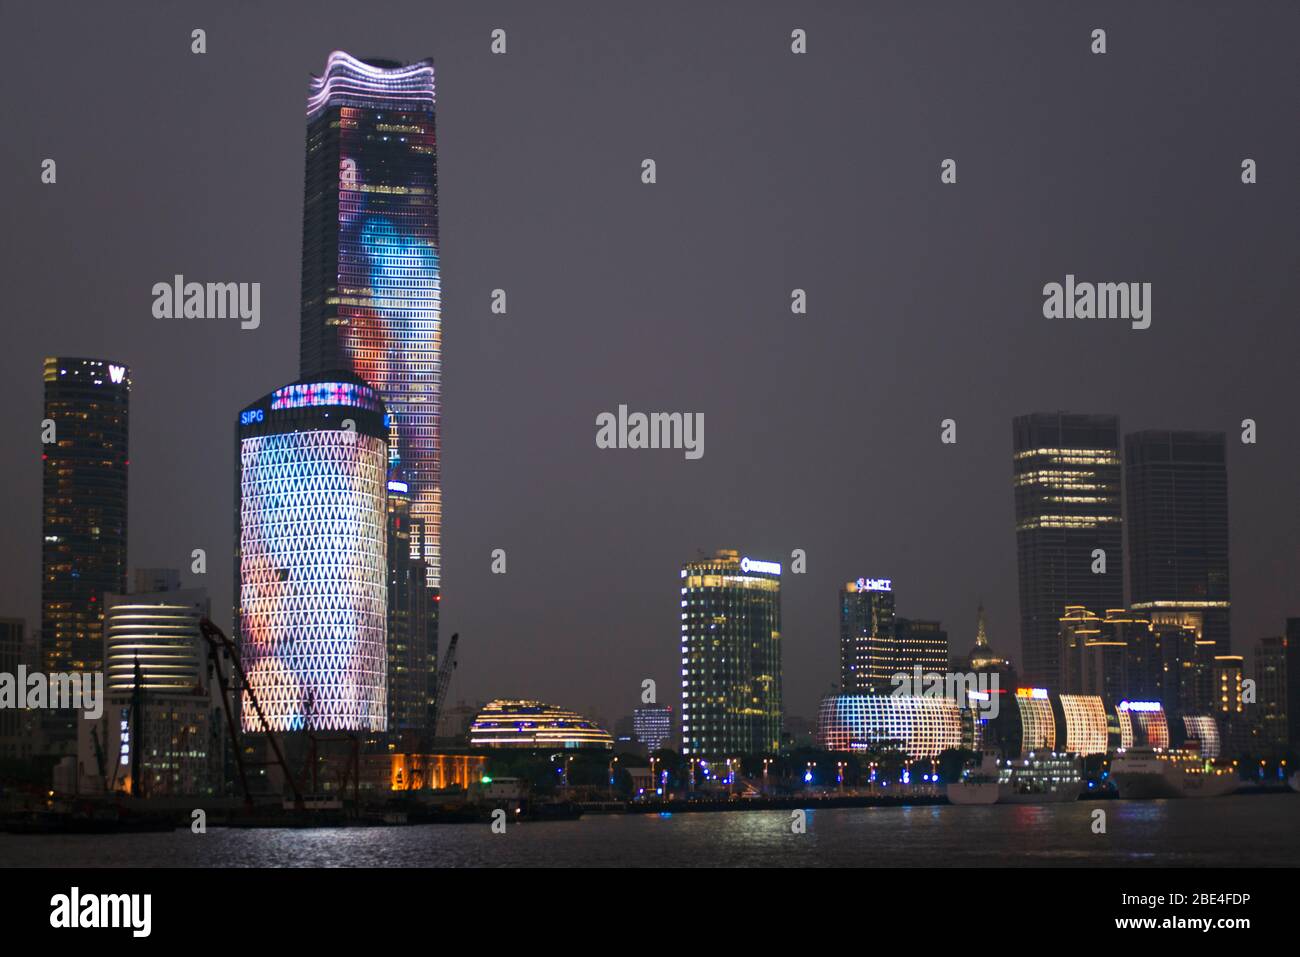 Shanghai skyscrapers at night illuminated by LED lighting, view from the Bund, China Stock Photo